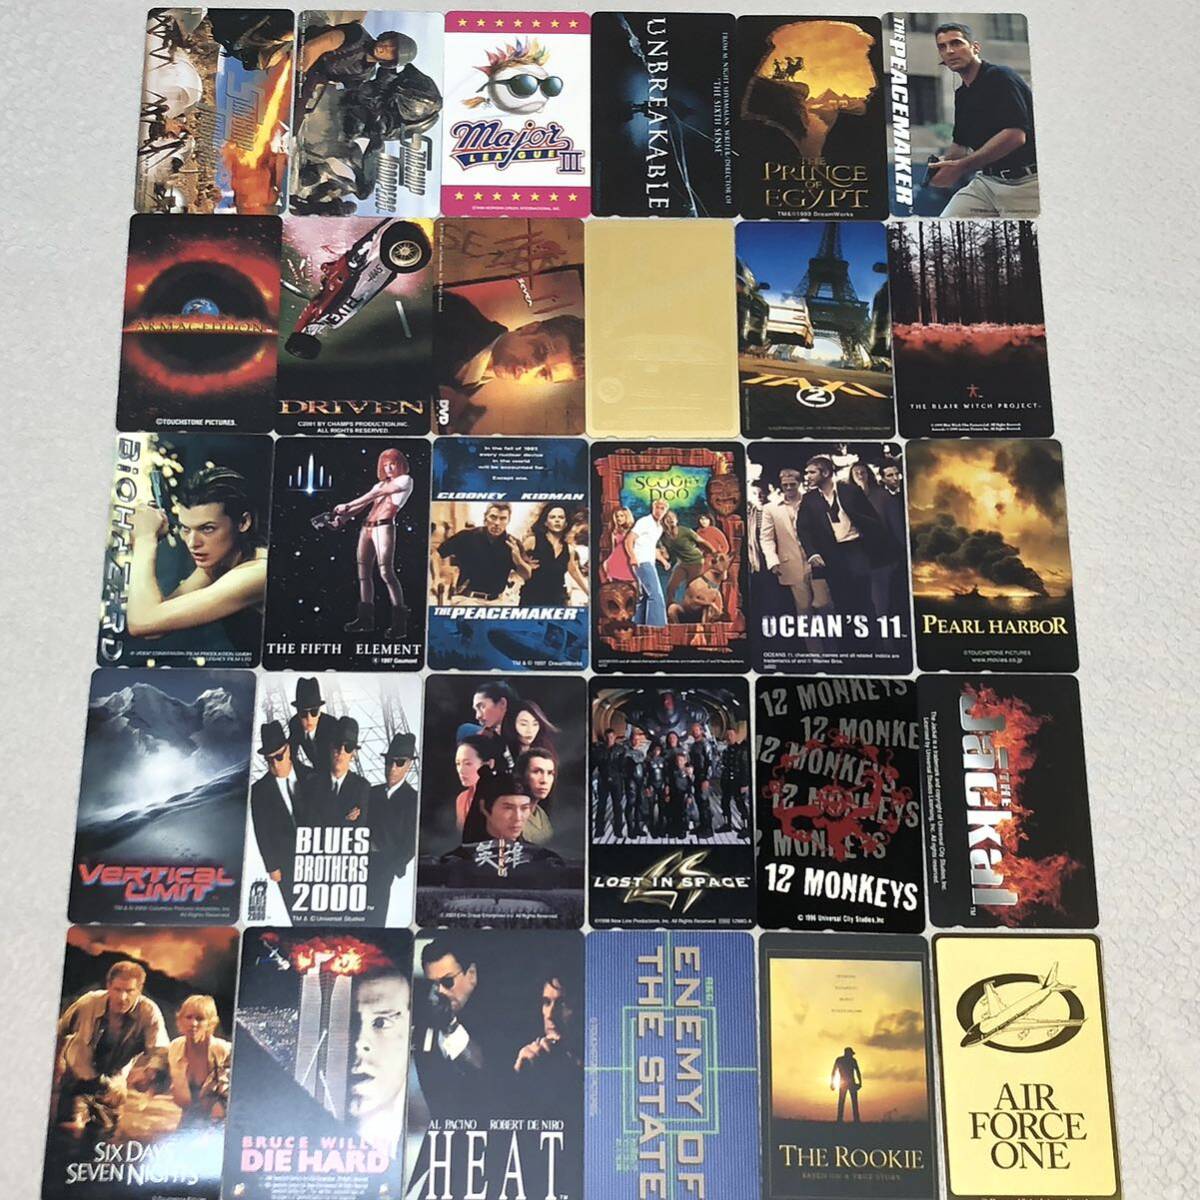 6 unused telephone card 50 frequency 30 pieces set Western films movie collection goods large hard Vaio hazard taxi 2 Ocean z11 etc. 